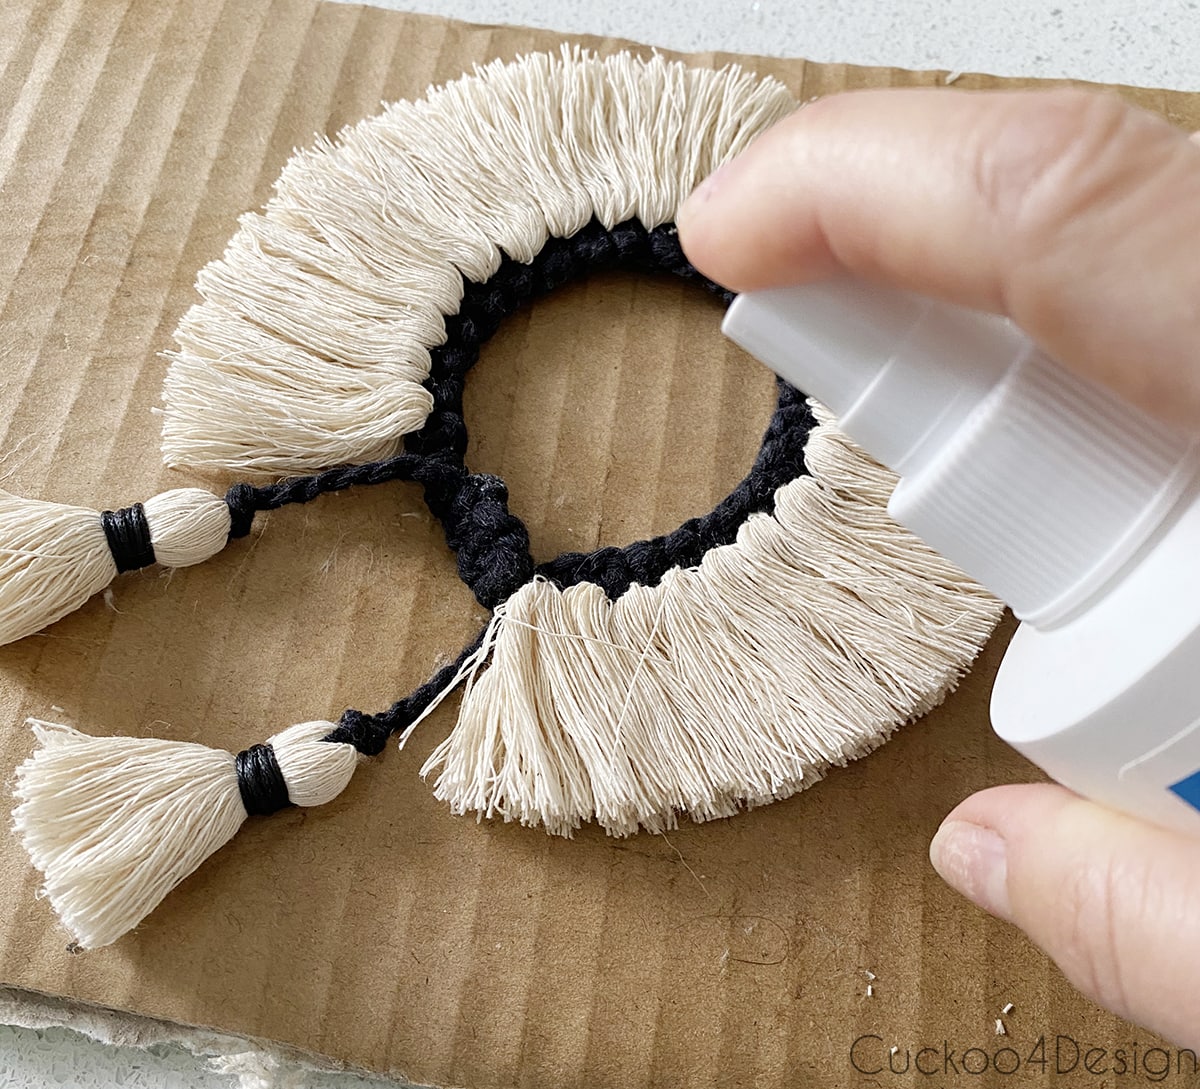 spraying the fringed part of the knotted bracelet with fabric stiffener